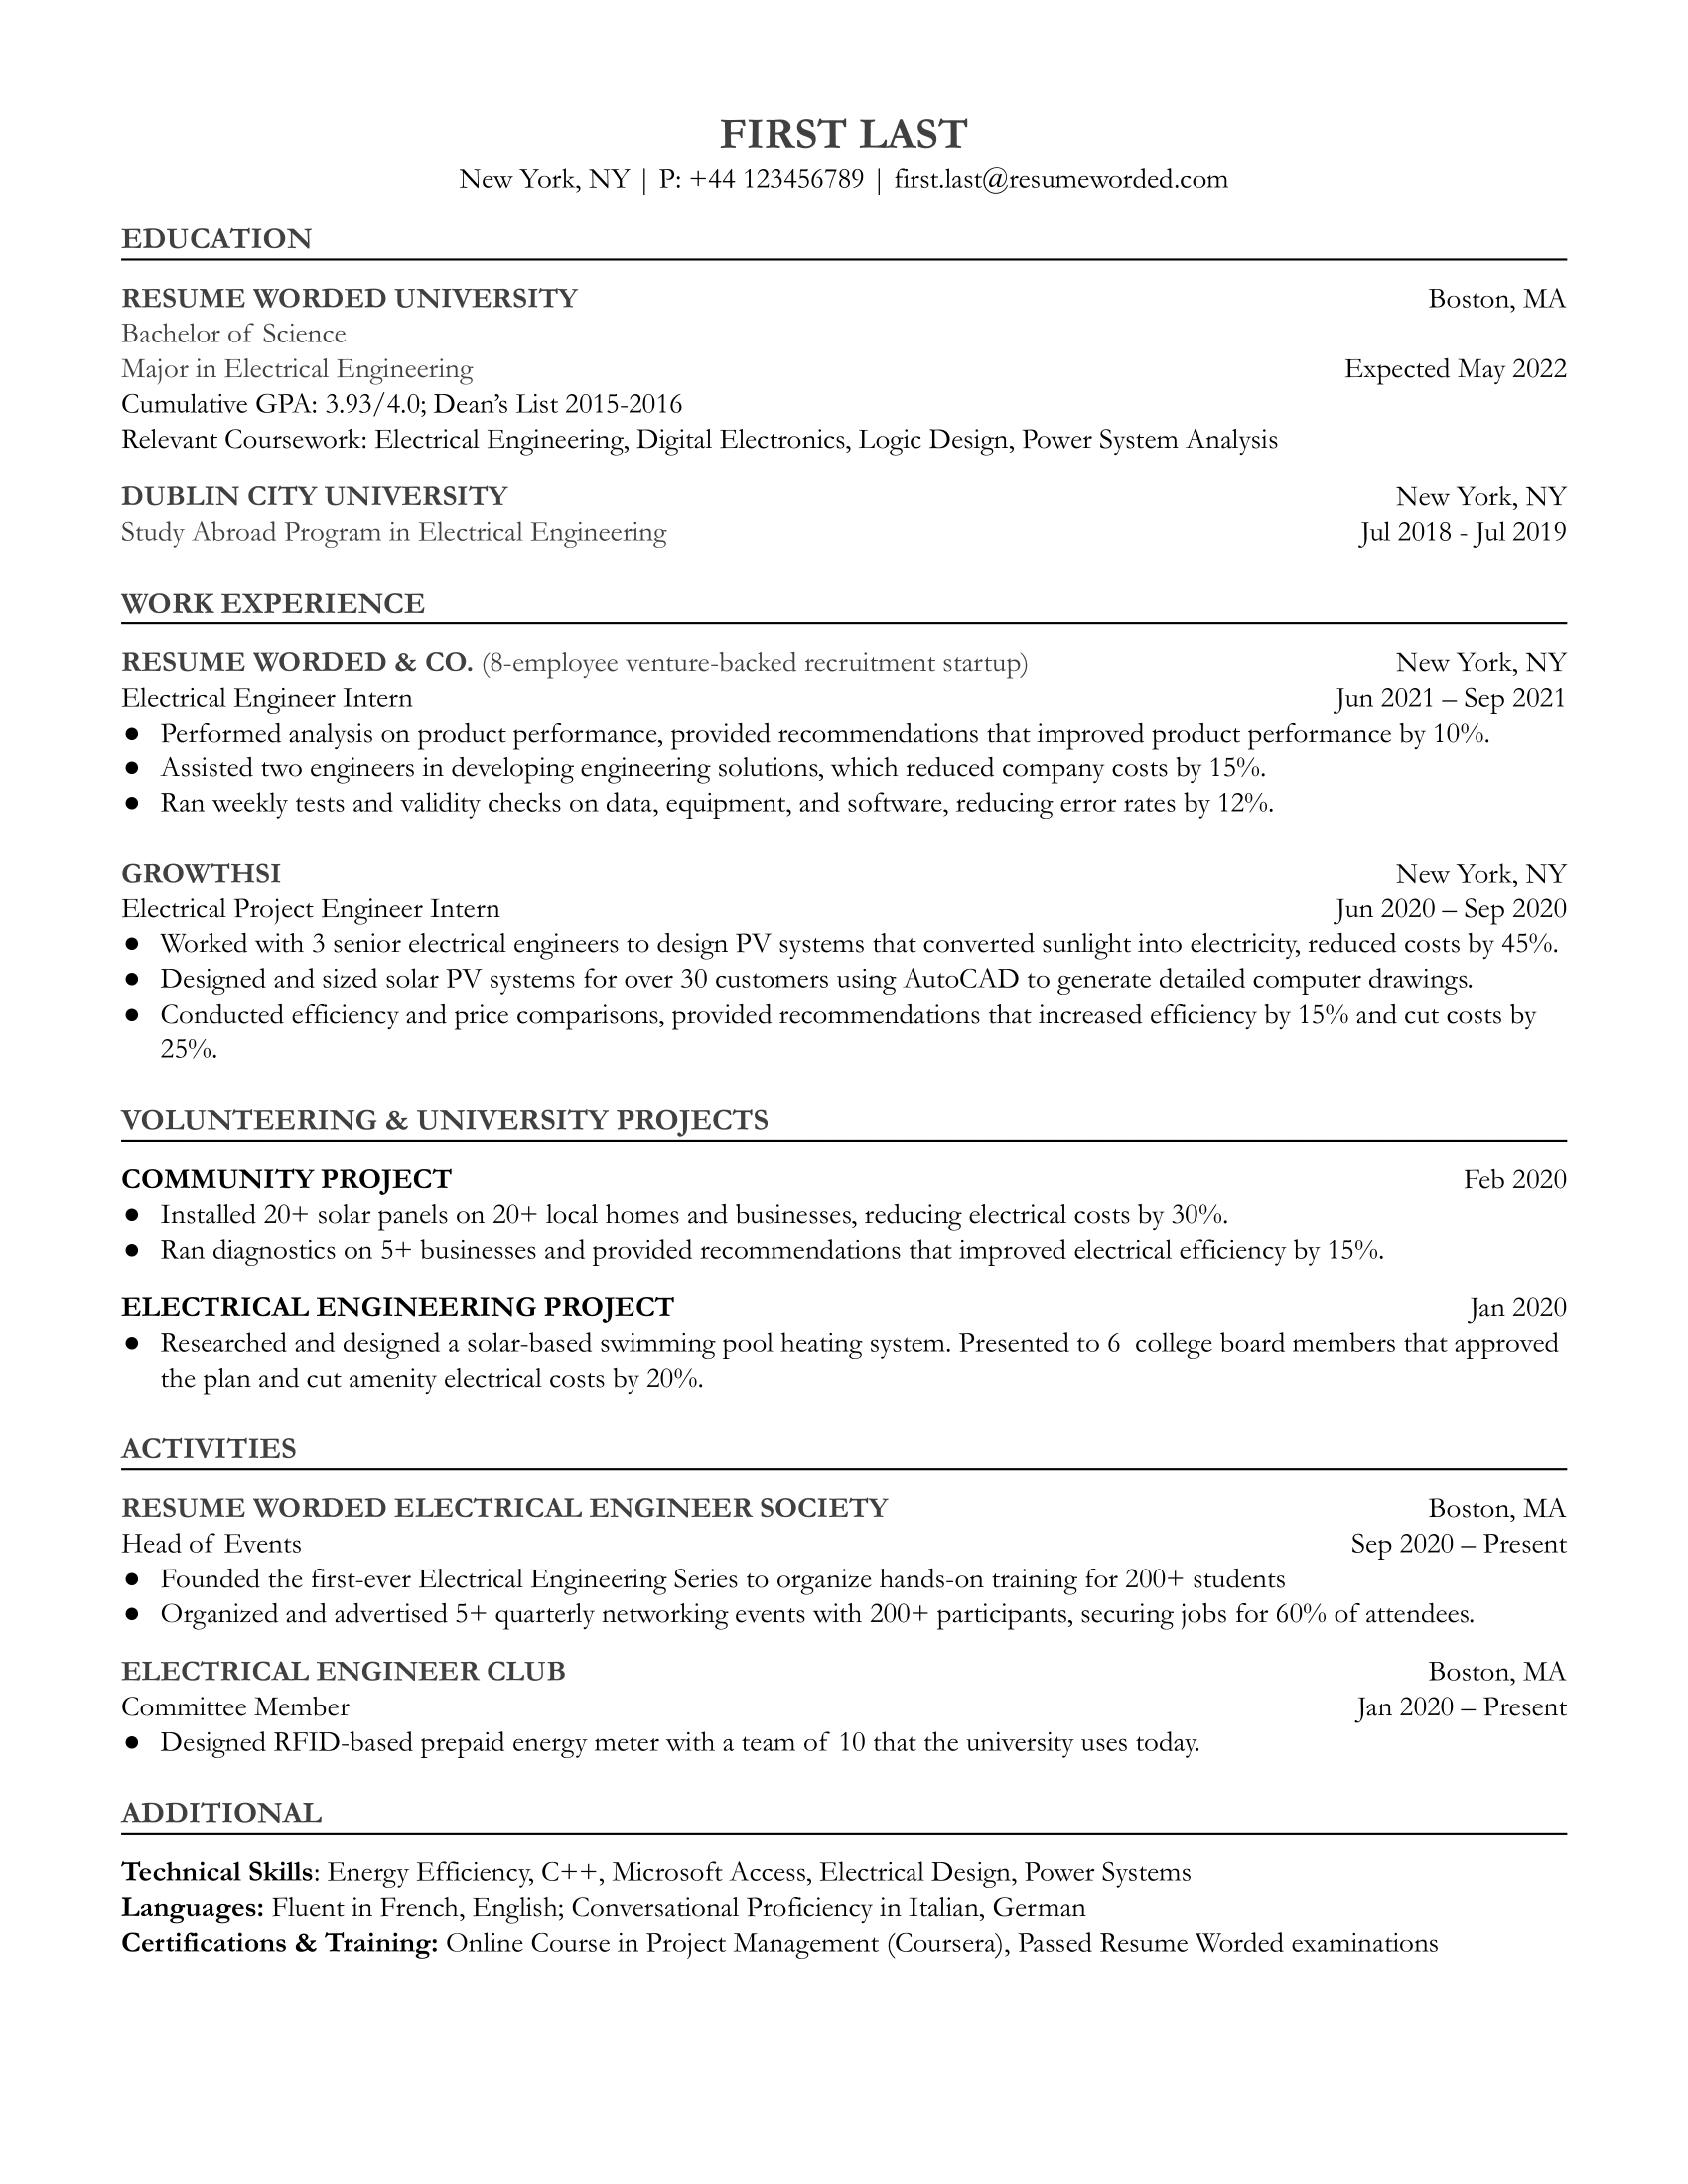 Entry level electrical engineer resume with educational history, internships, and volunteer projects